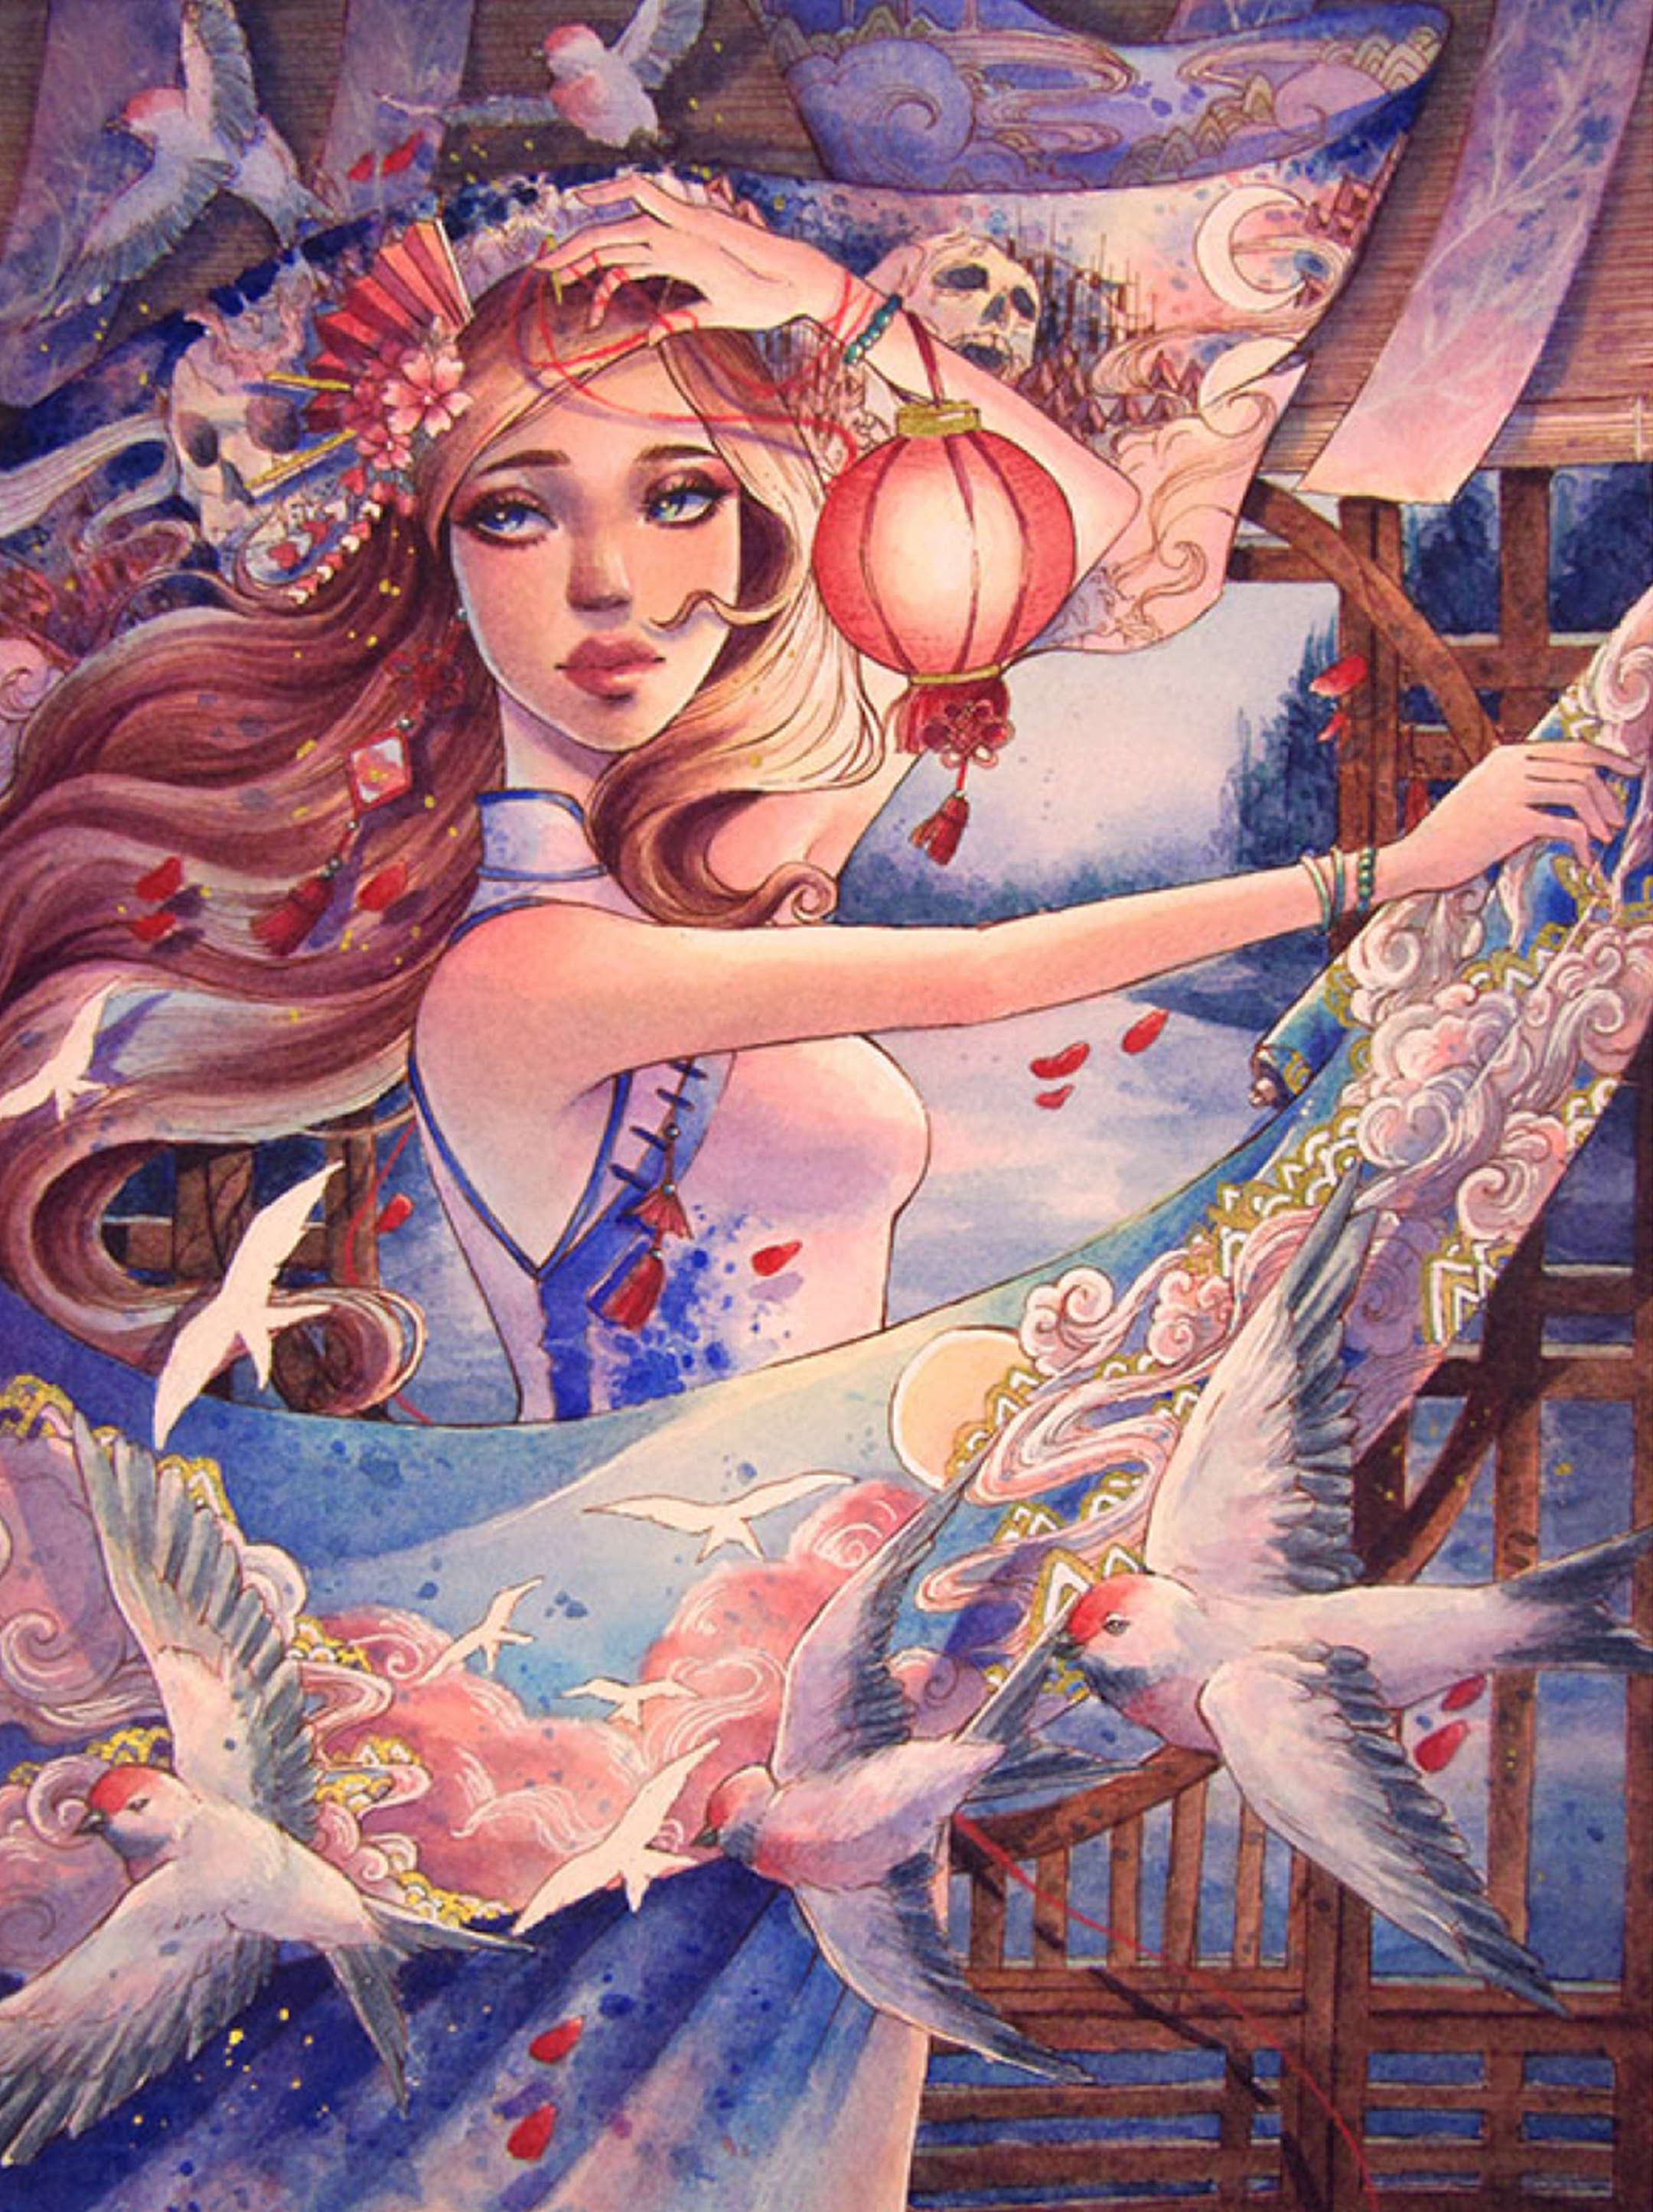 Painting of a young woman in a fantasy scene of doves and wind and elements